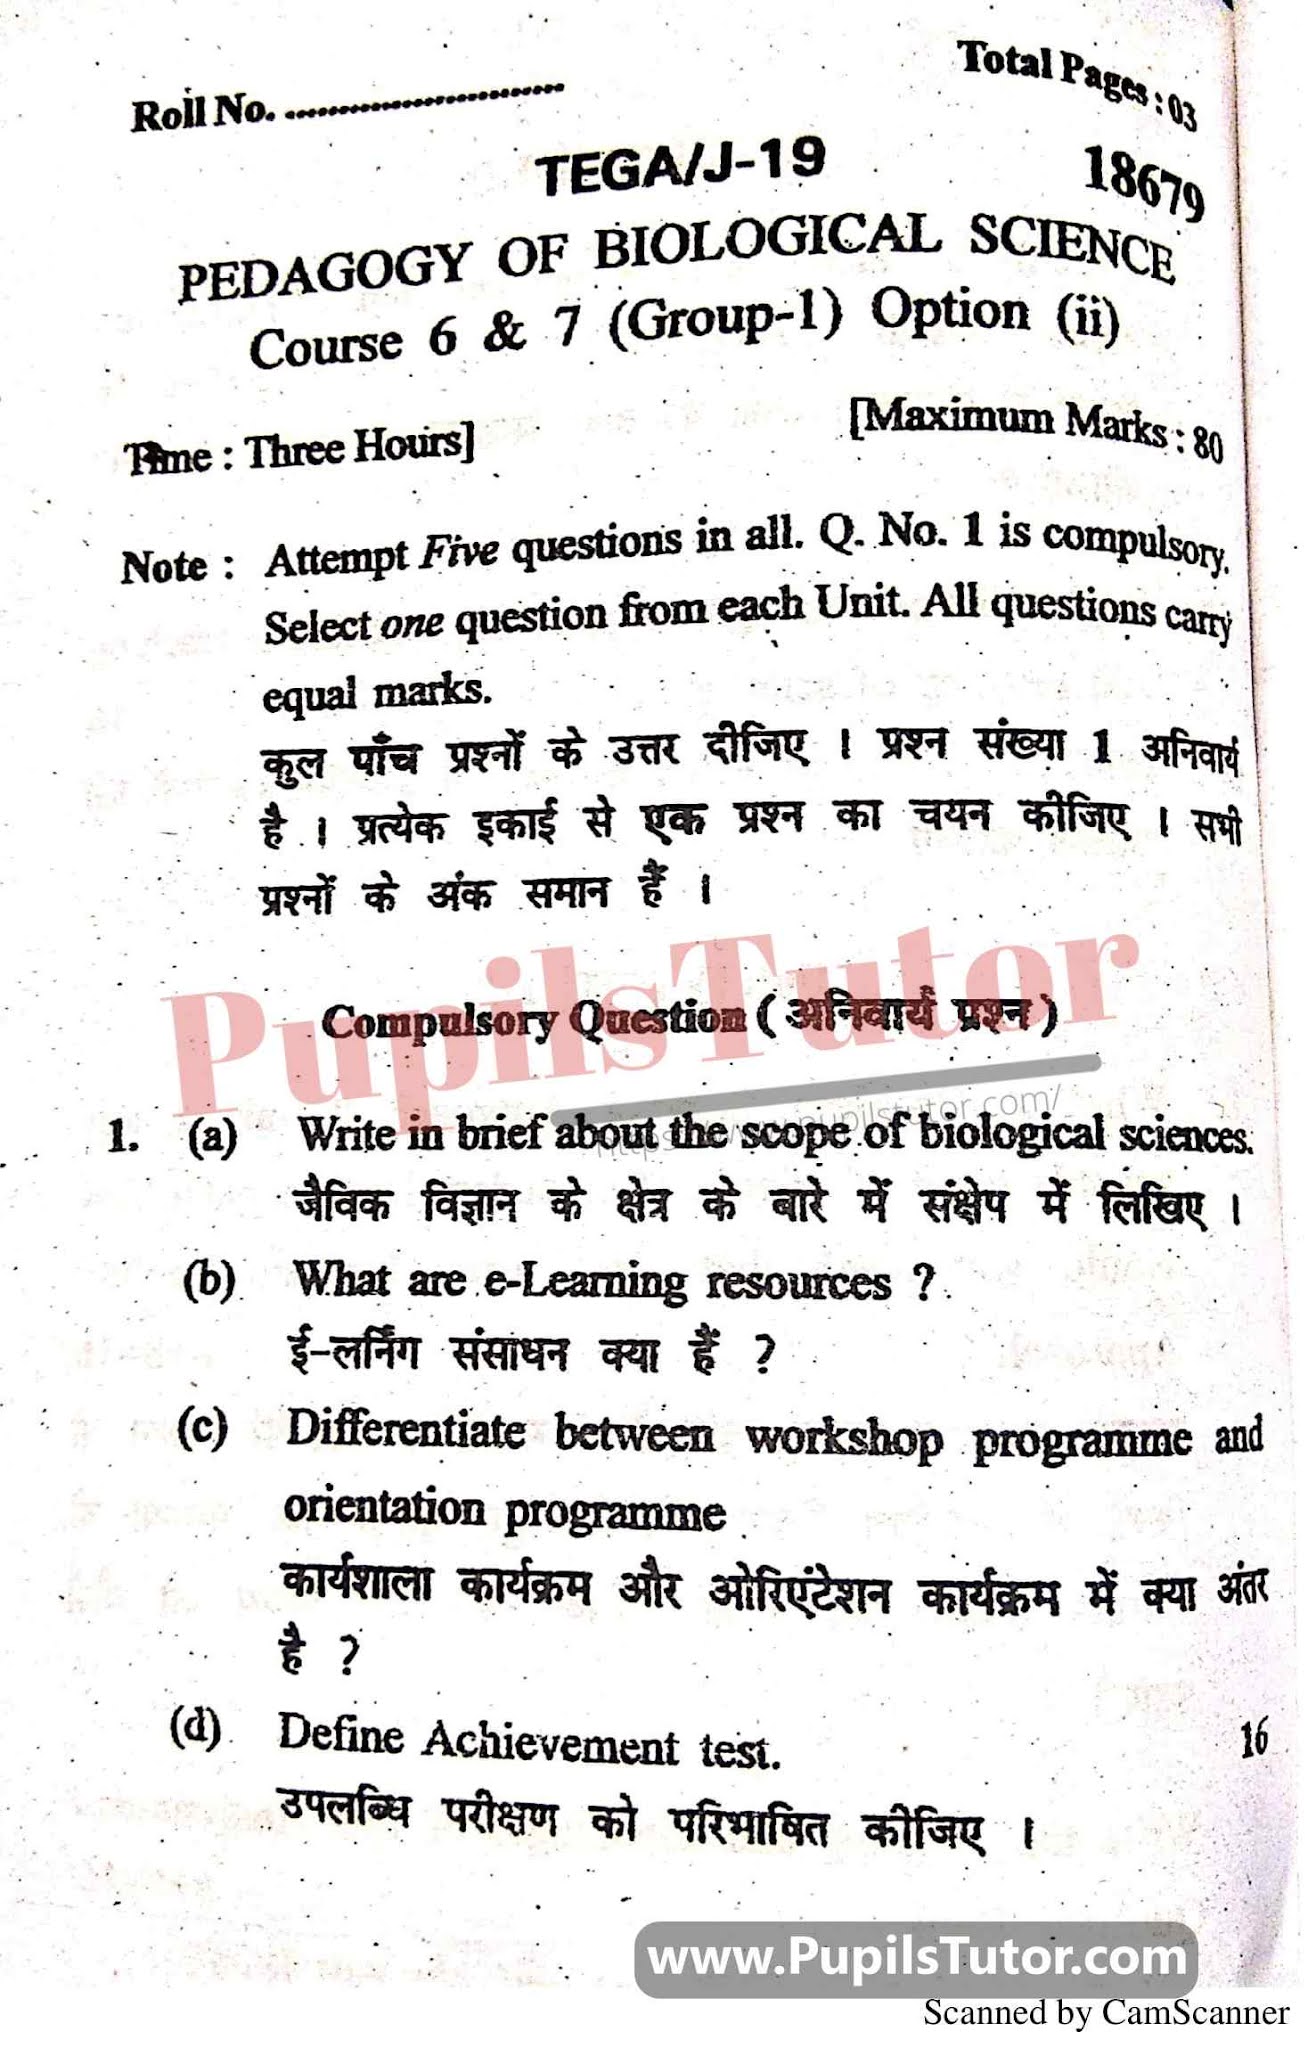 KUK (Kurukshetra University, Haryana) Pedagogy Of Biological Science Question Paper 2019 For B.Ed 1st And 2nd Year And All The 4 Semesters In English And Hindi Medium Free Download PDF - Page 1 - Pupils Tutor